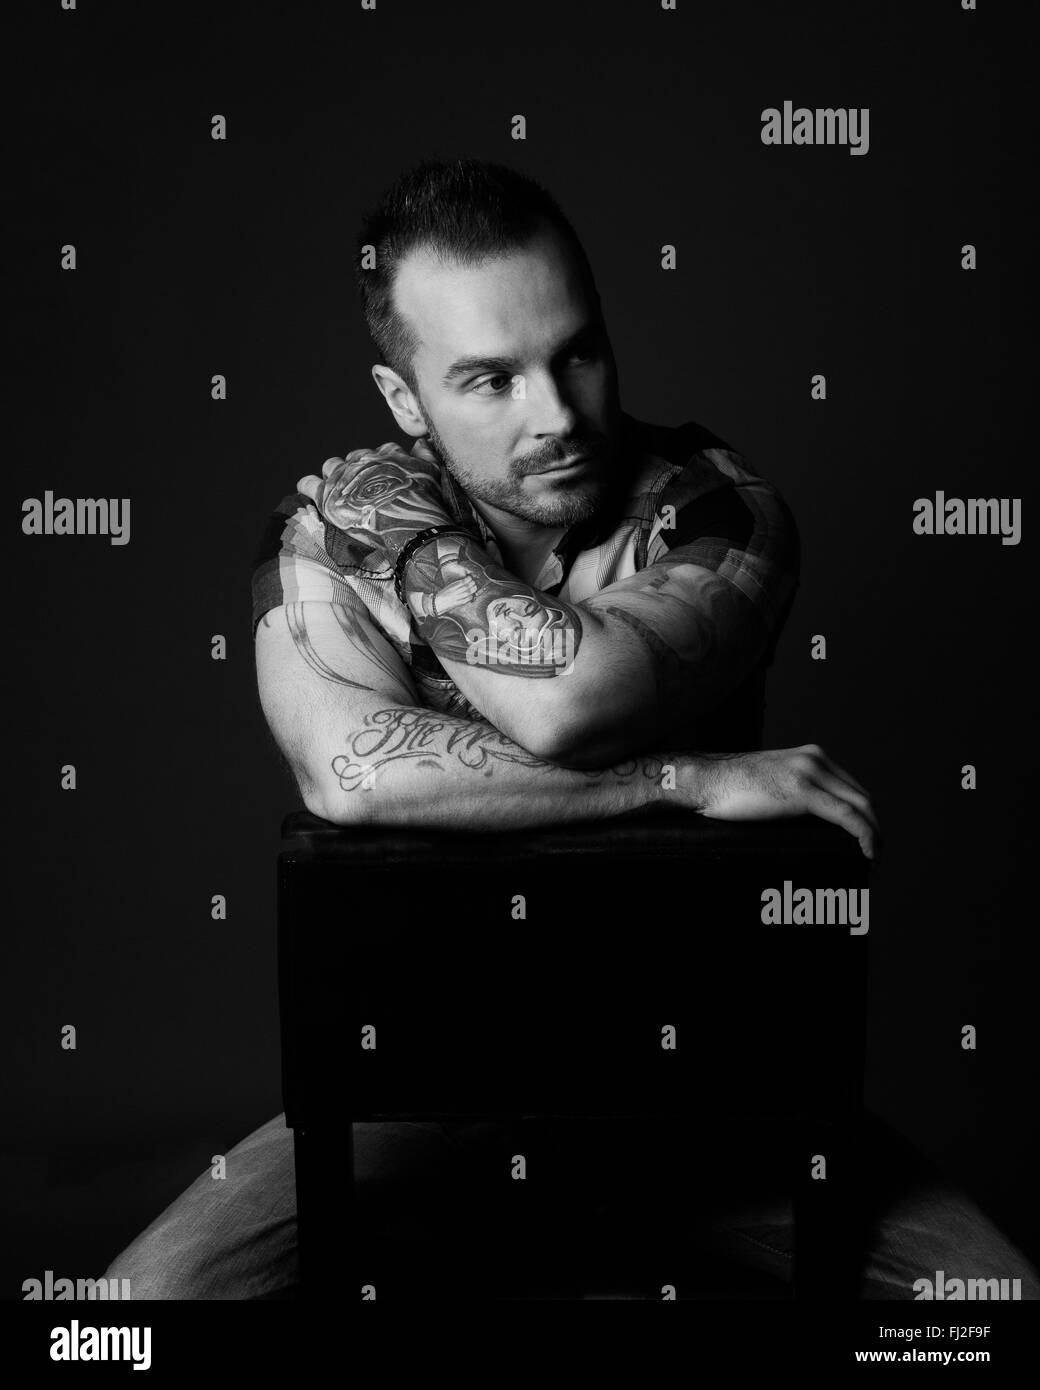 Pensive man with beard sitting on stool looking away with short sleeved shirt and tattoos in a black and white low-key setting Stock Photo